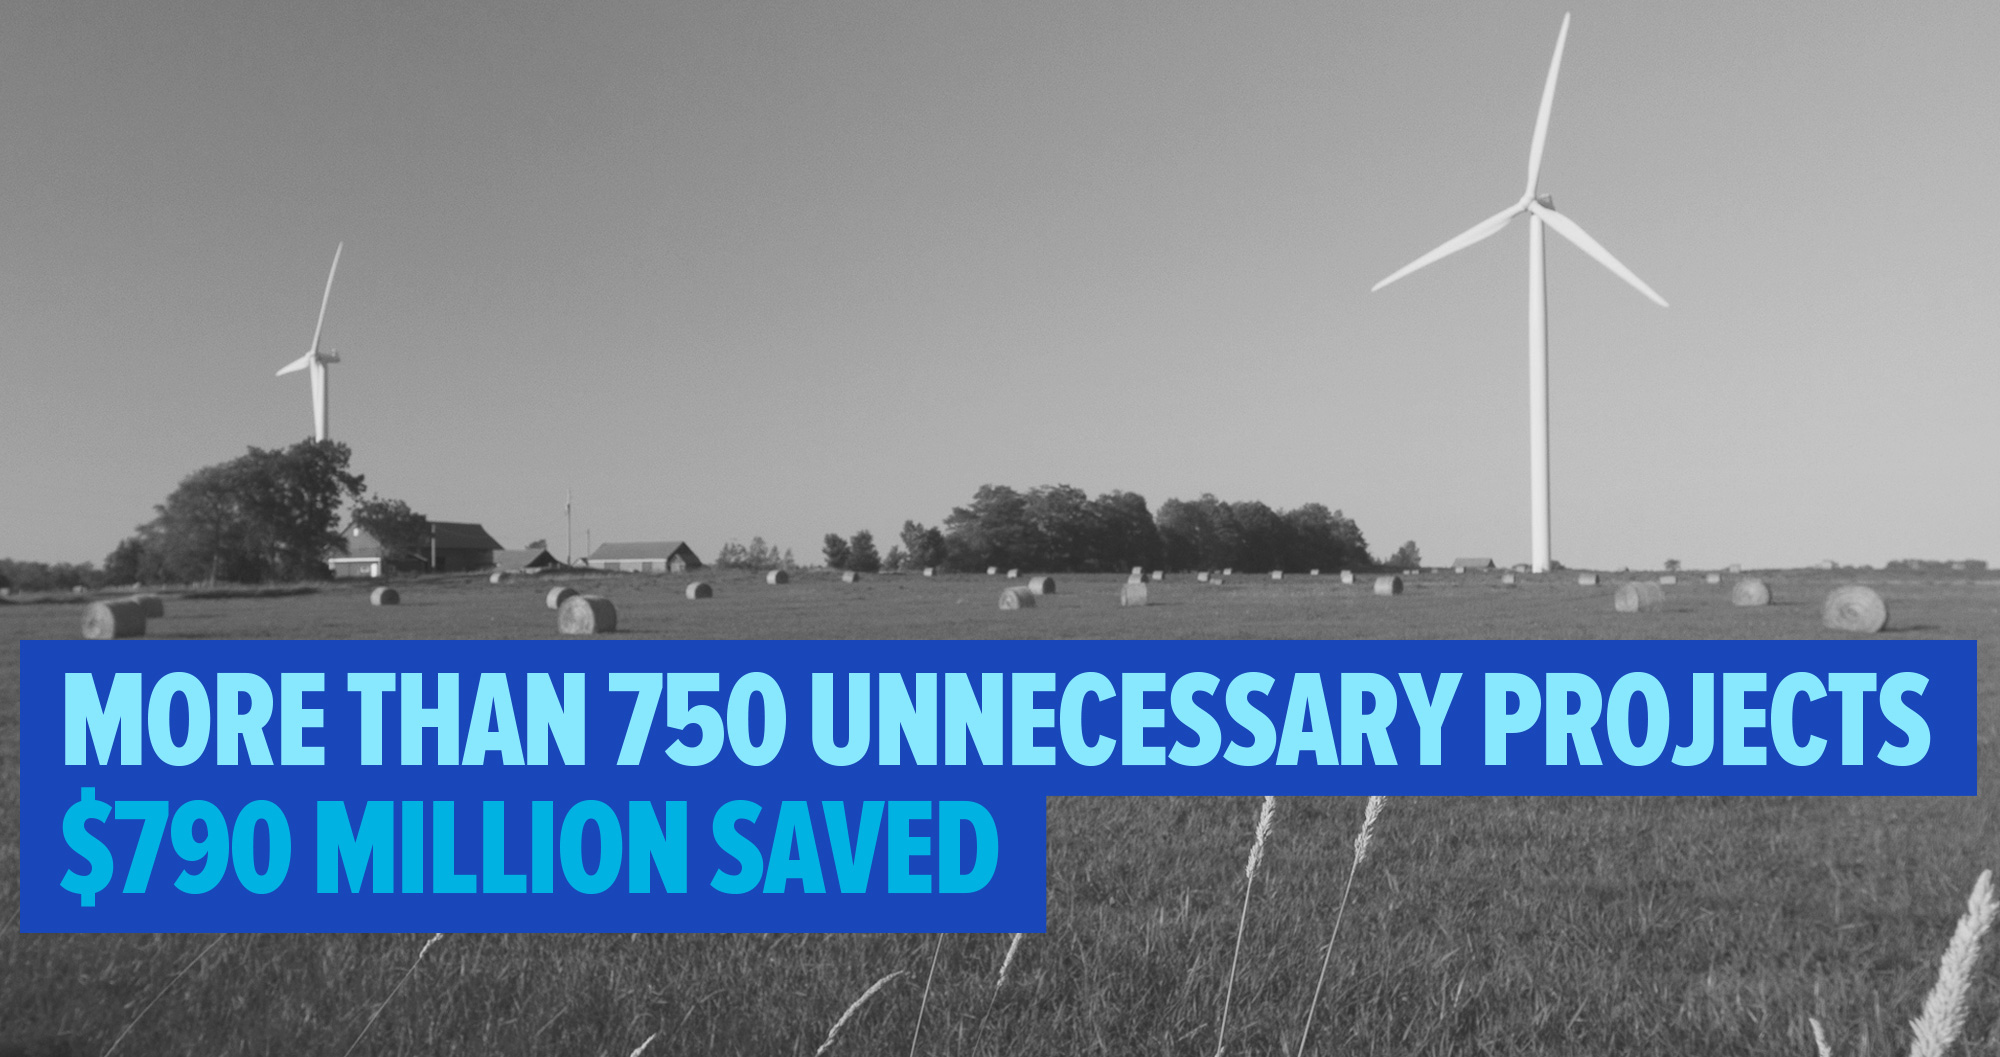 Photo of windmills with text: More than 750 unnecessary projects - $790 million saved